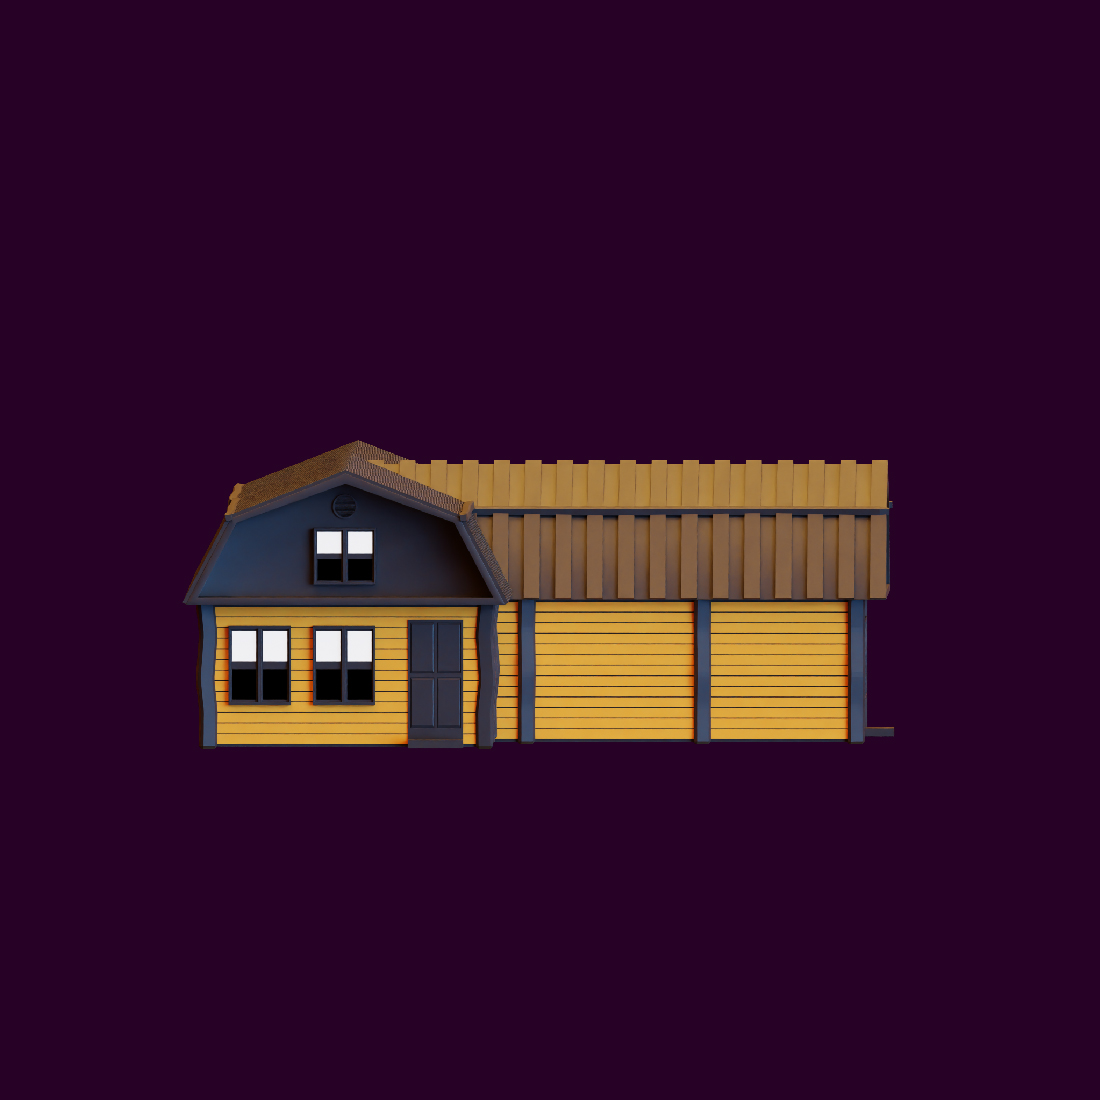 House with a brown roof and two windows.